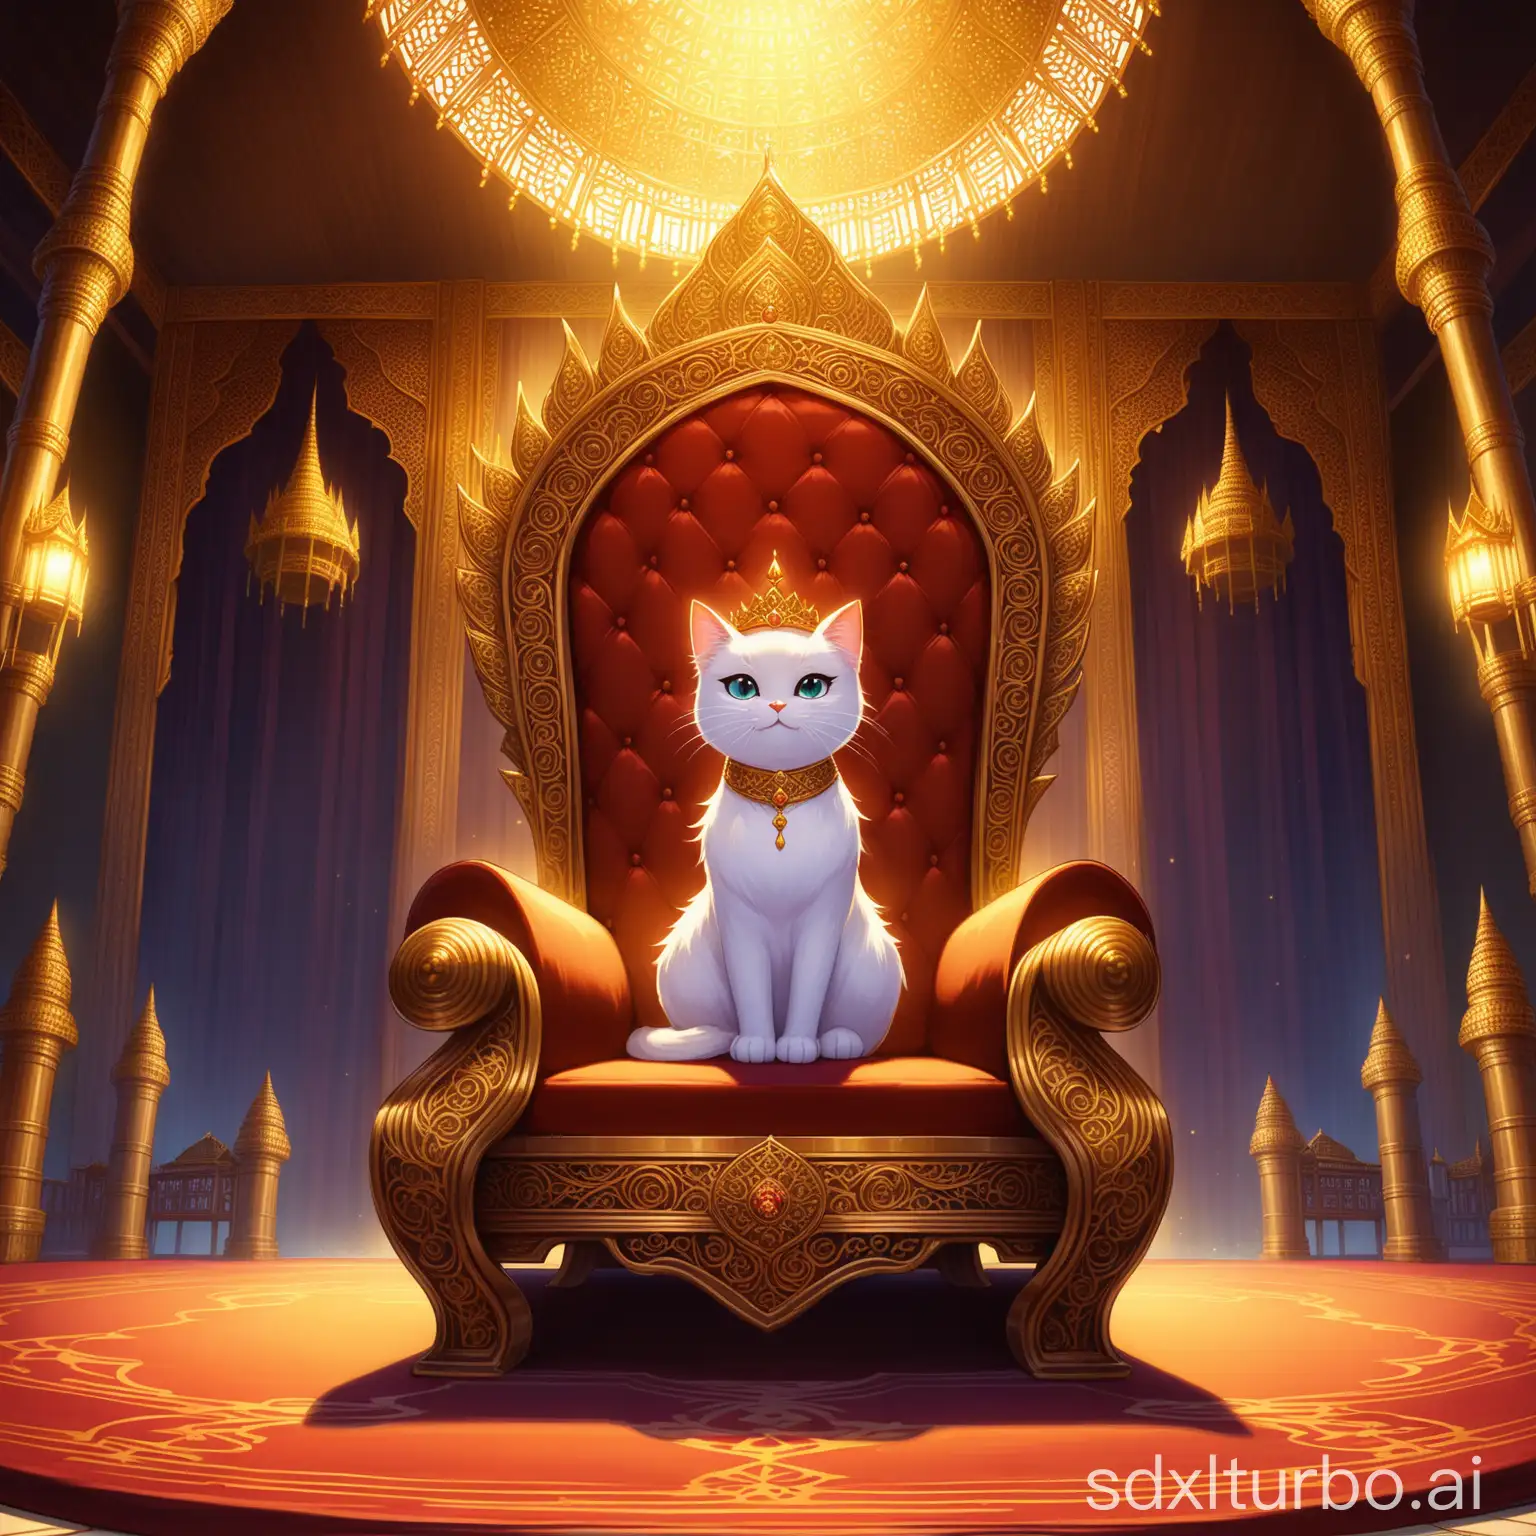 throne in the palace of the siam cat princess, at dusk, high detail, ultra-high definition